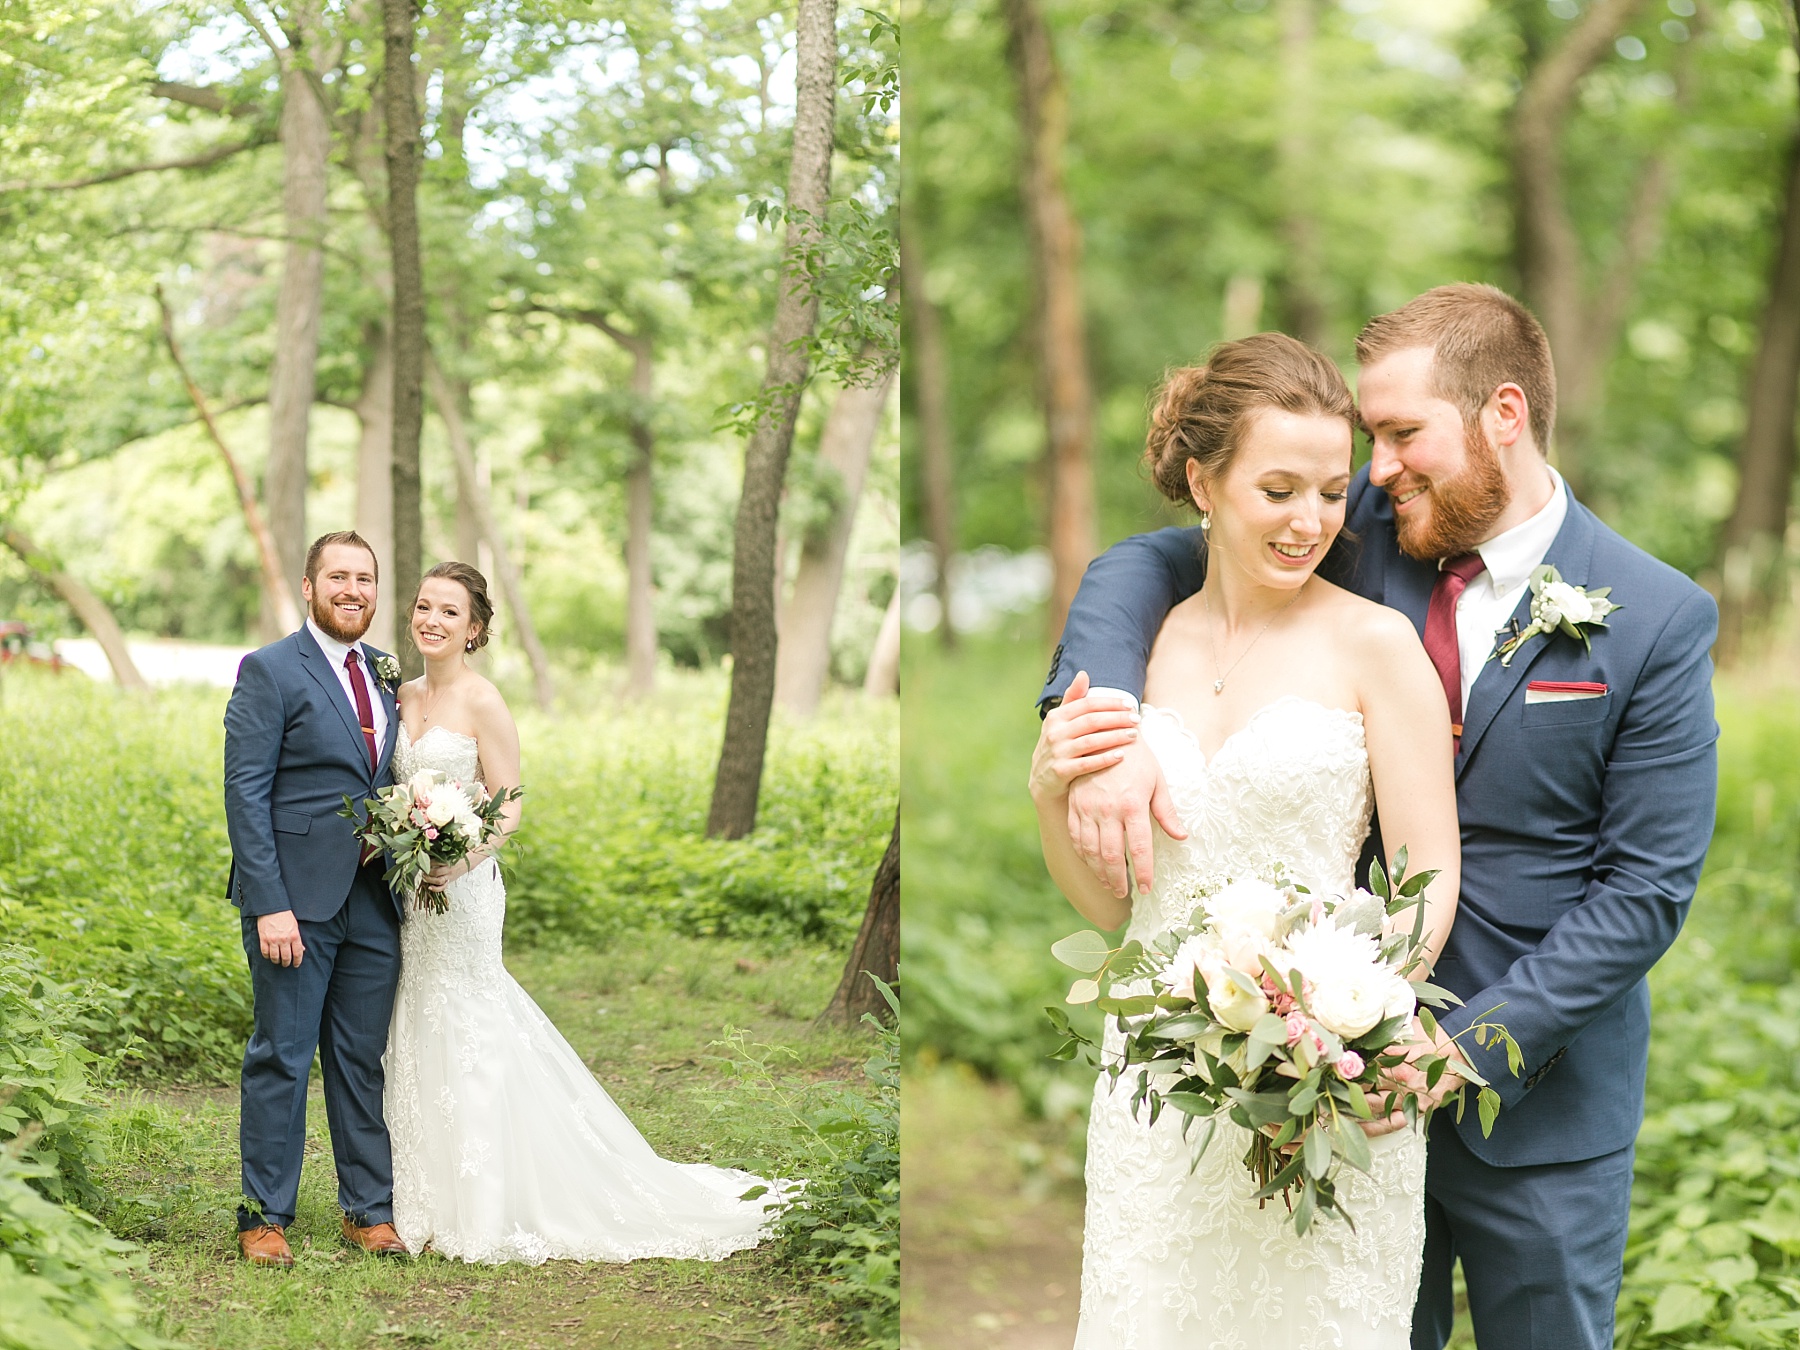 A summer wedding set on a nature reserve tucked in Monona, WI - this Aldo Leopold Nature Center Wedding in Madison, WI is a beautiful treat!